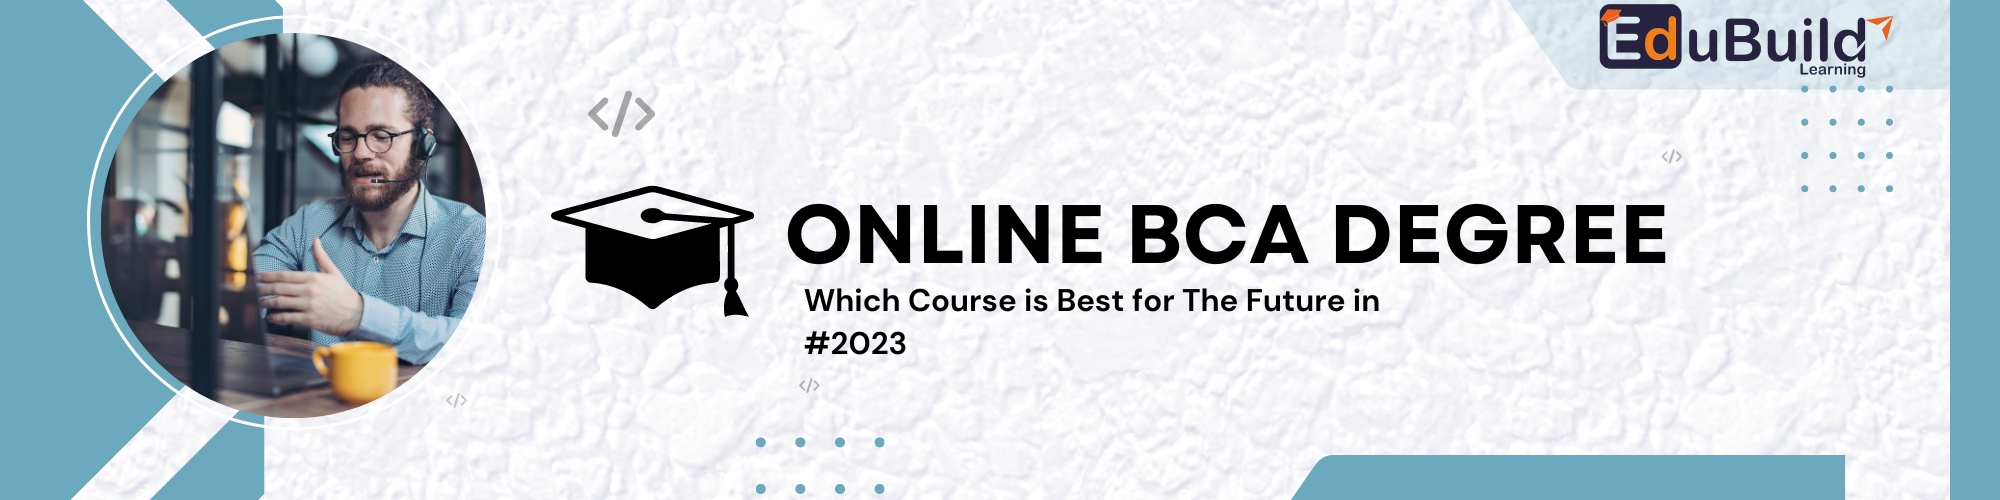 Online BCA Degree in India: Course, Fees, Career, and Admission 2023